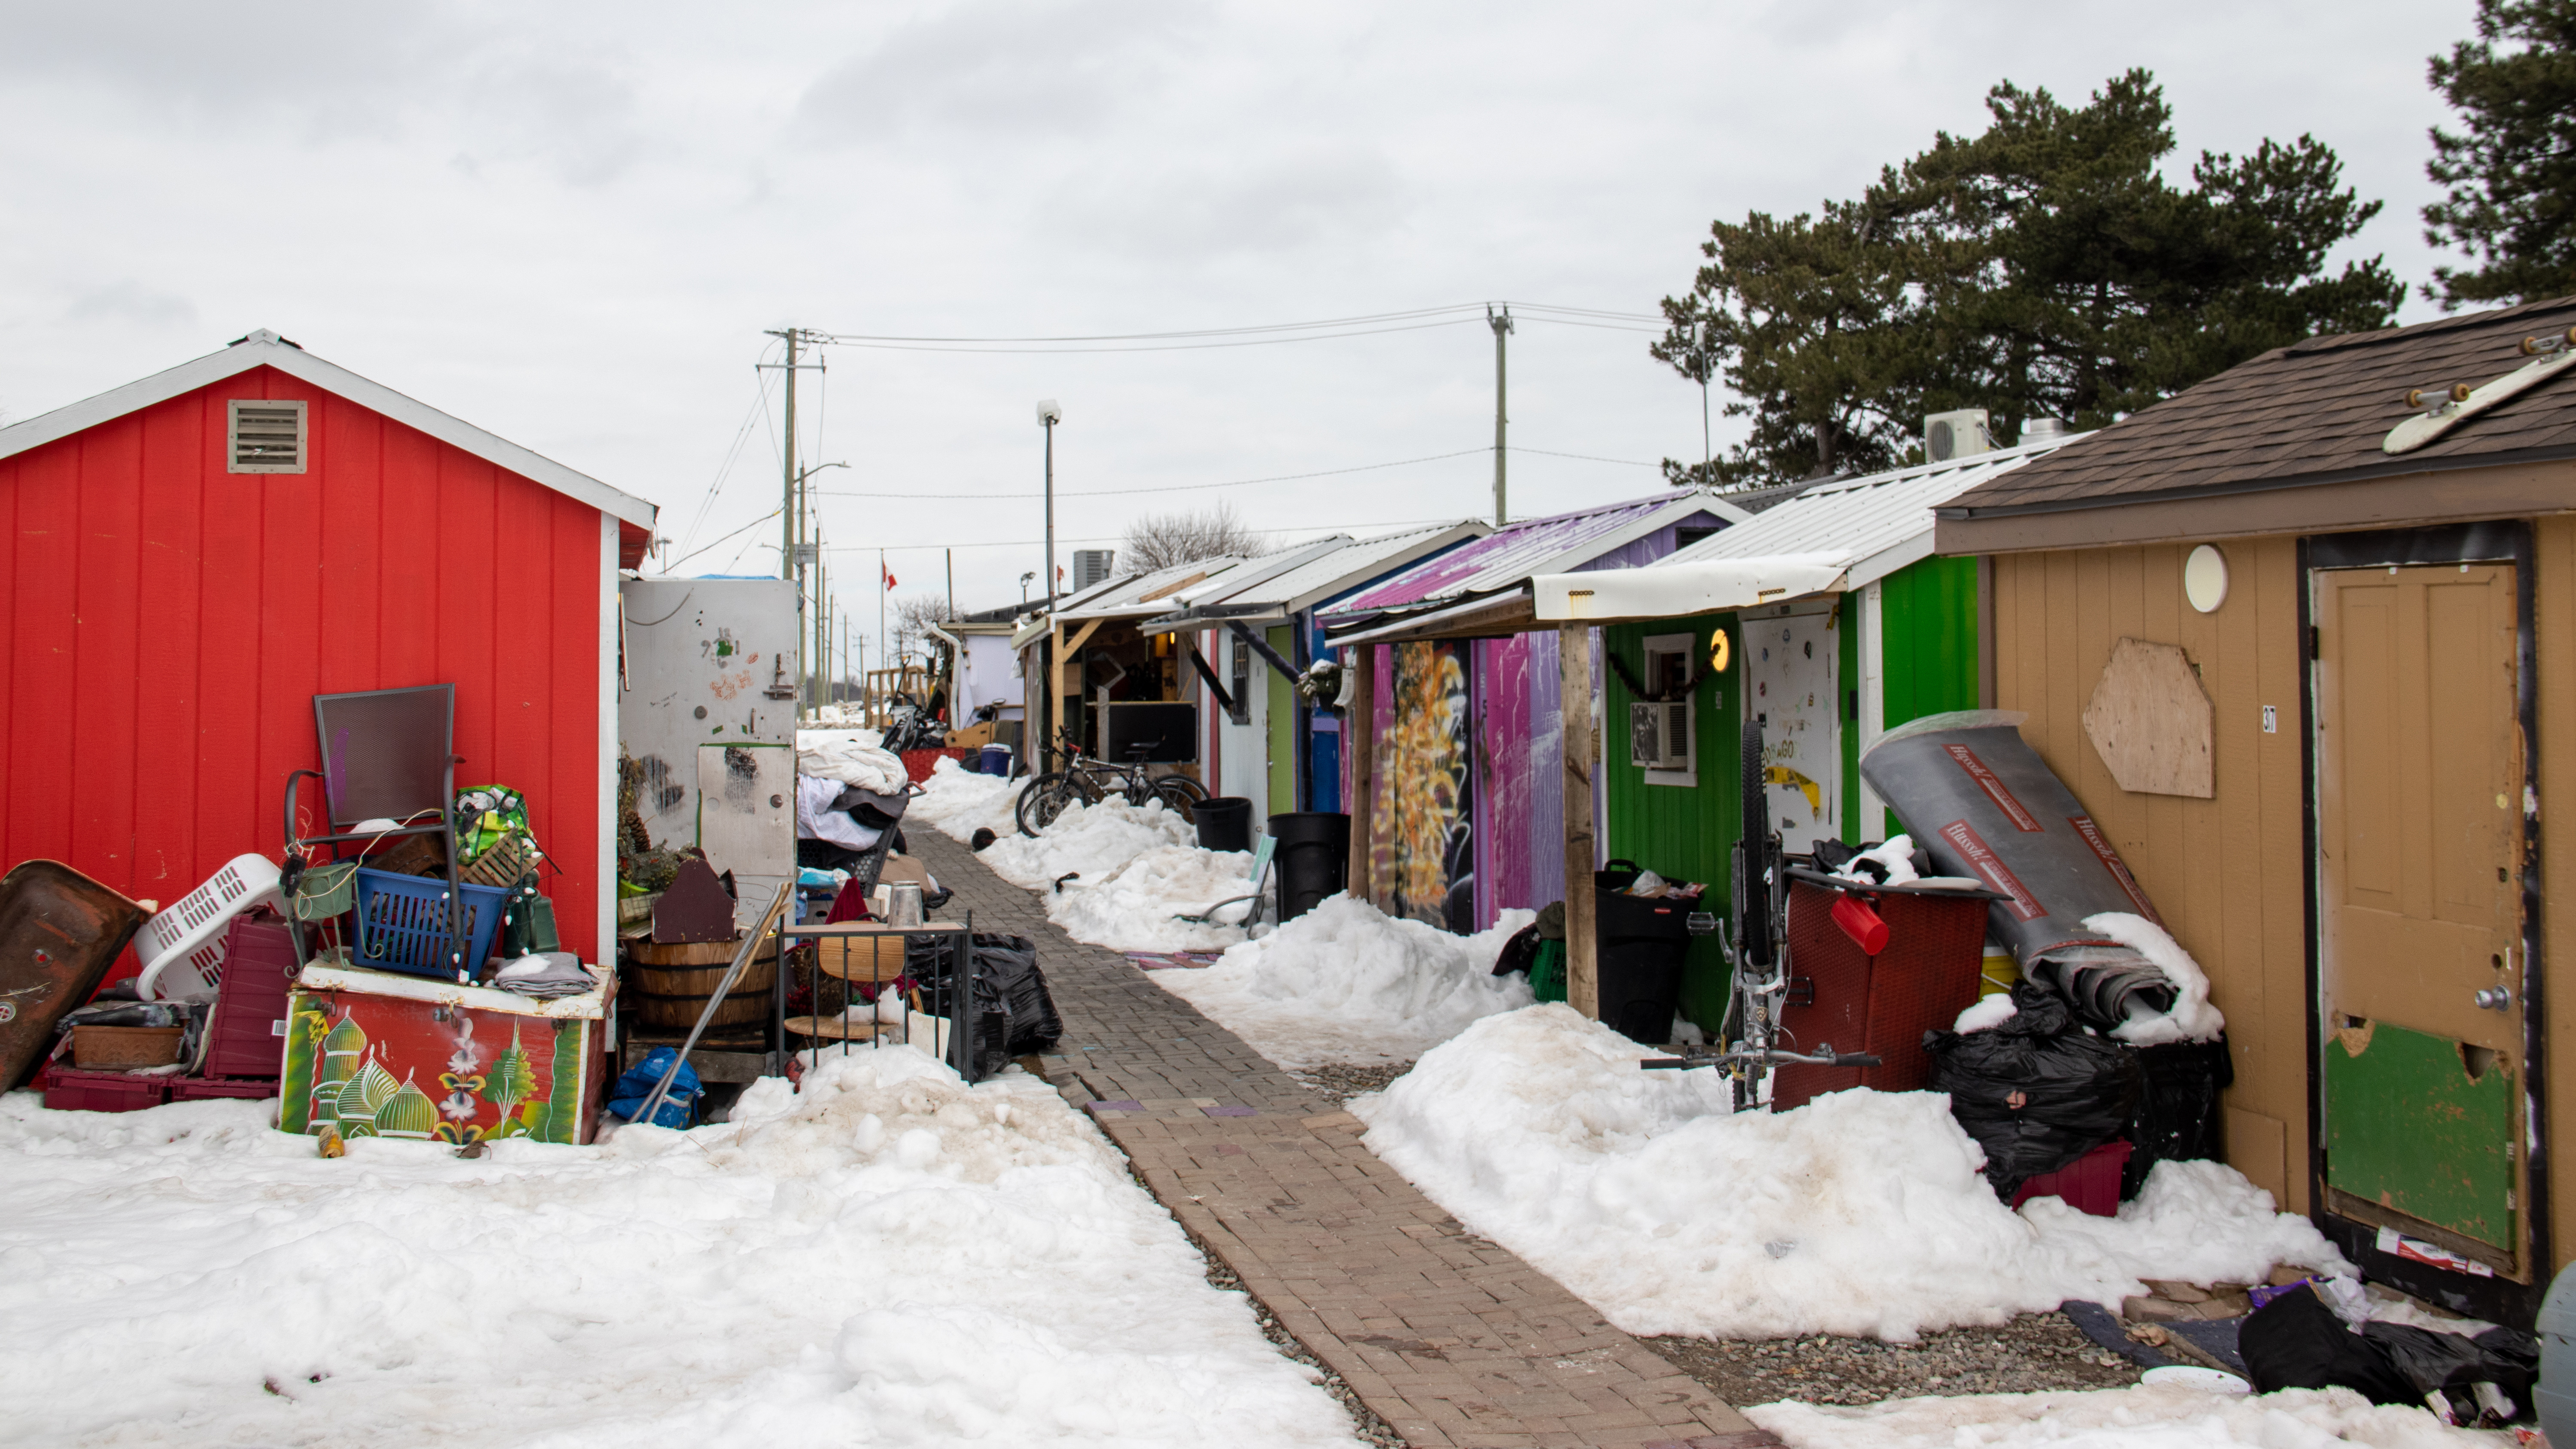 This woman hopes Moosonee allows her to live in her 'tiny home